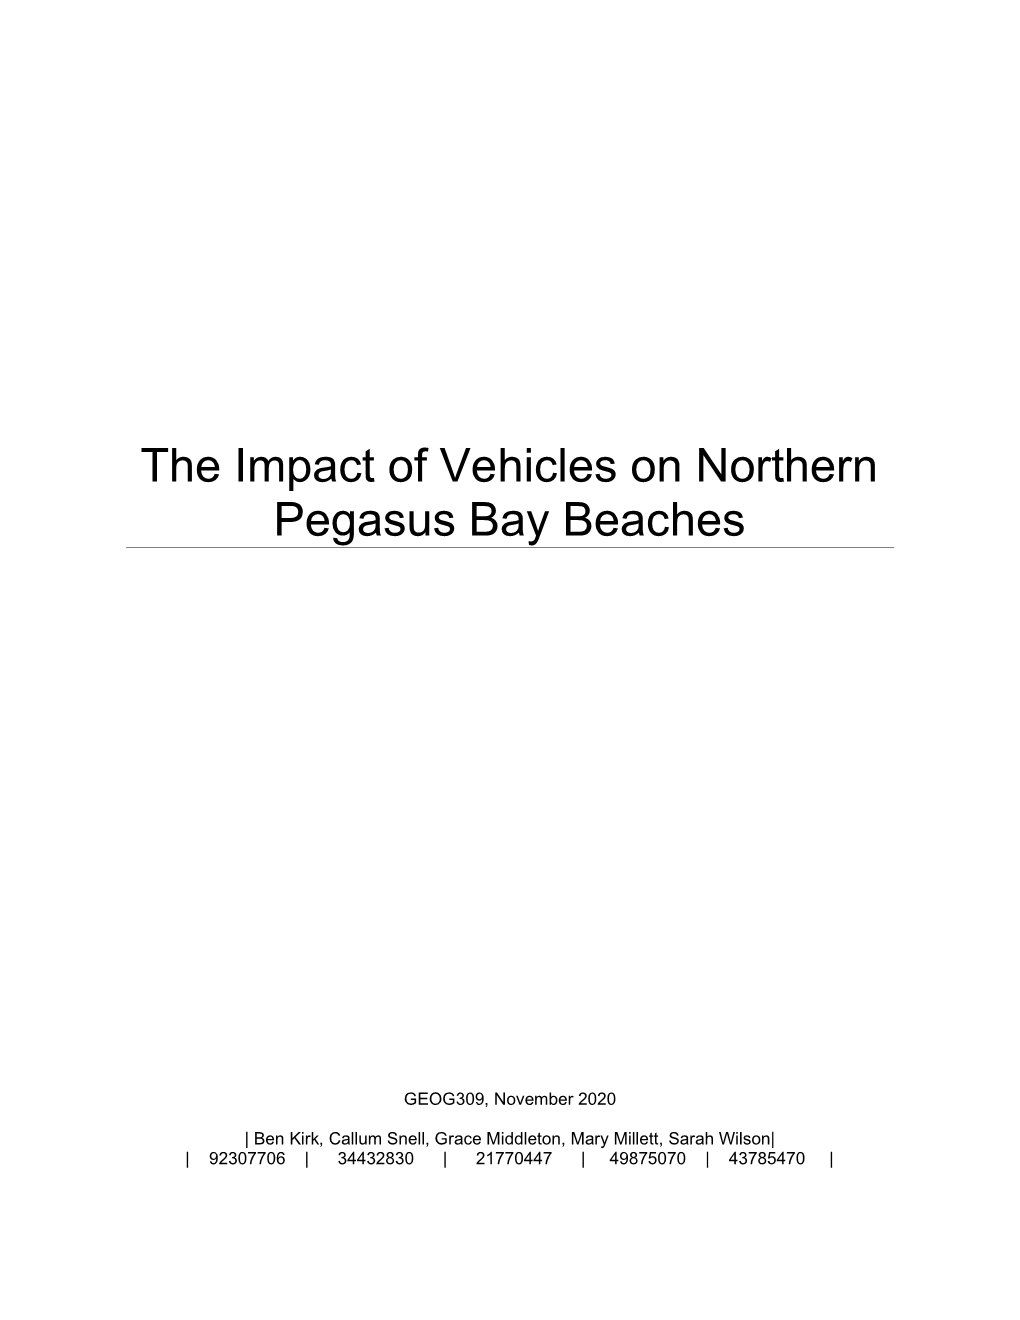 The Impact of Vehicles on Northern Pegasus Bay Beaches